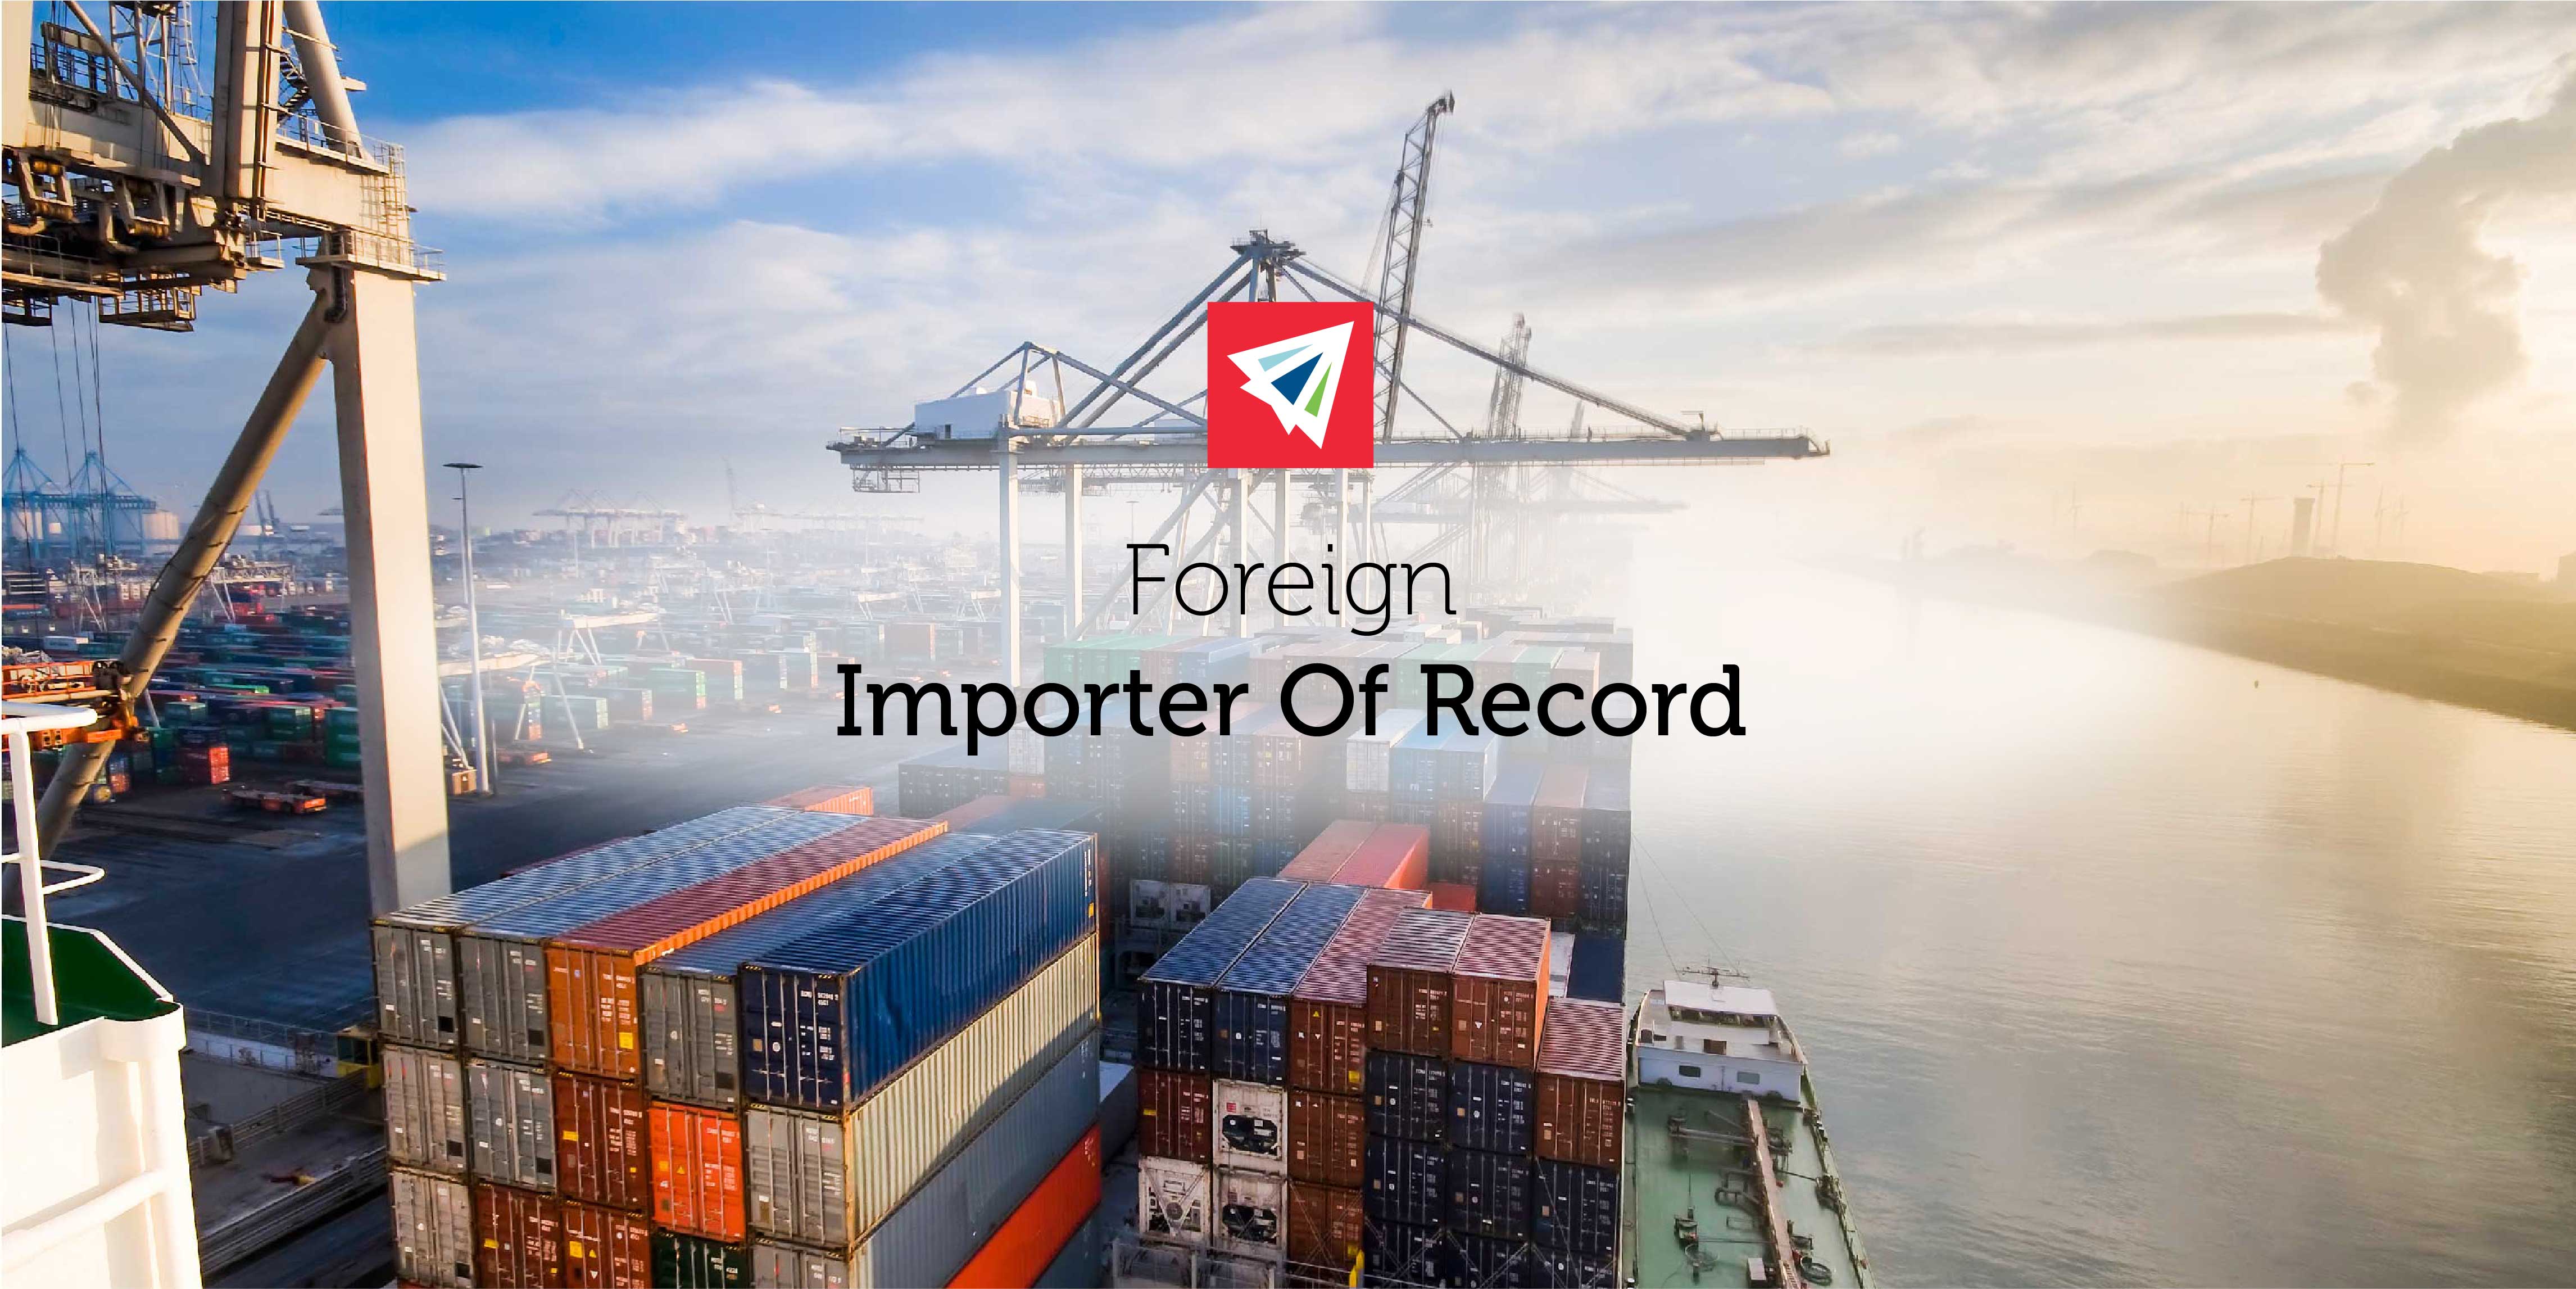 Foreign Importer Of Record